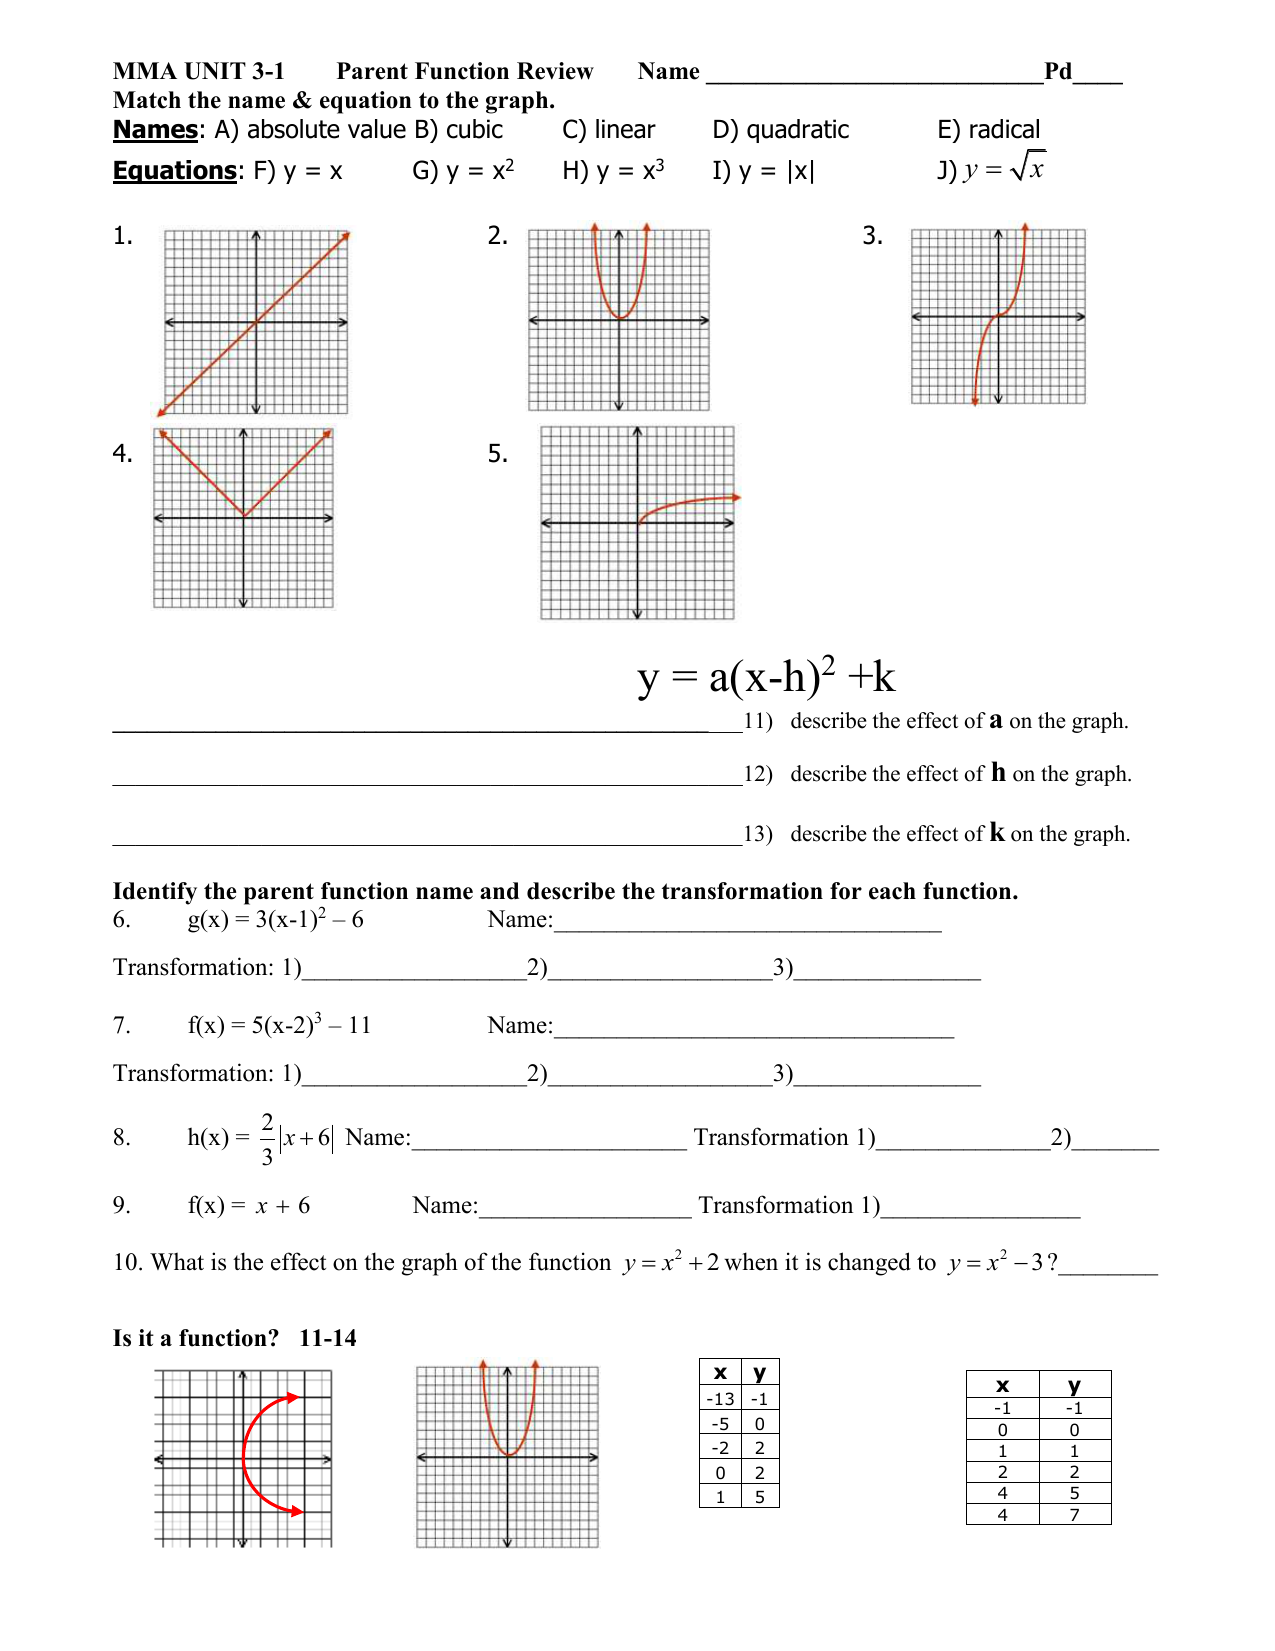 Parent Function Worksheet Answers